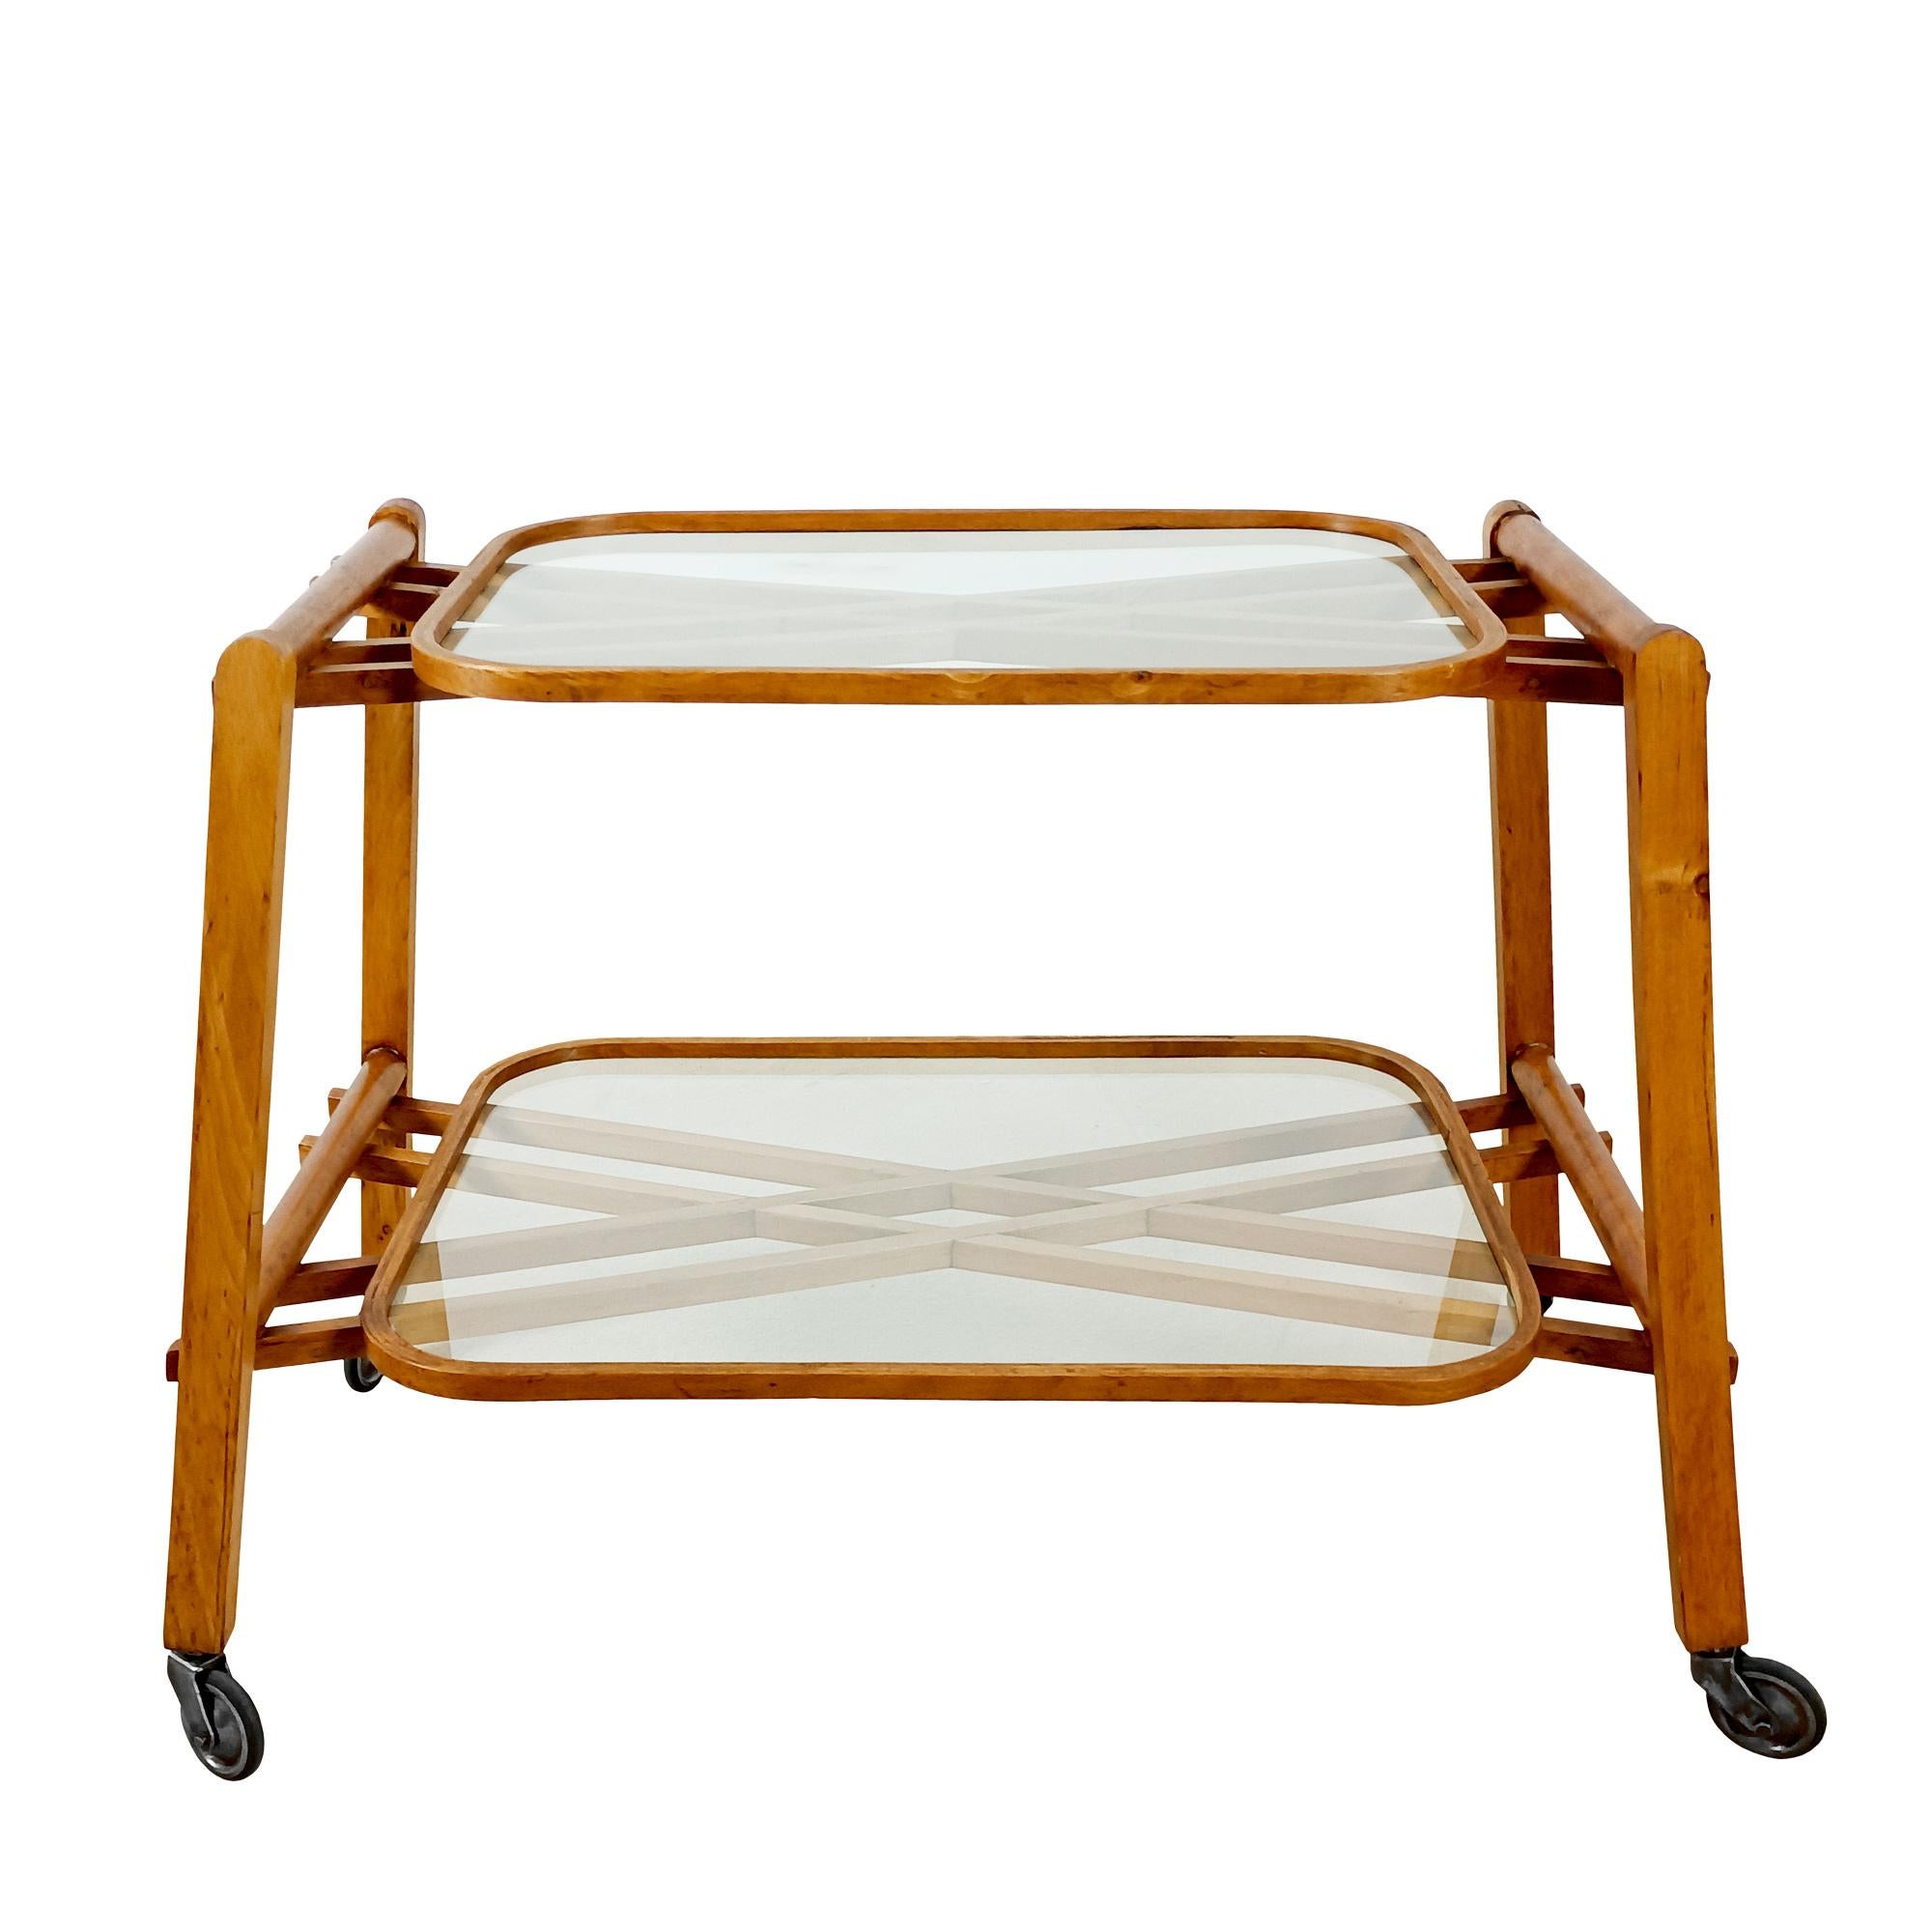 Mid-20th Century Mid-Century Modern Two-Level Serving Cart In Solid Oak And Glass - Italy 1940 For Sale